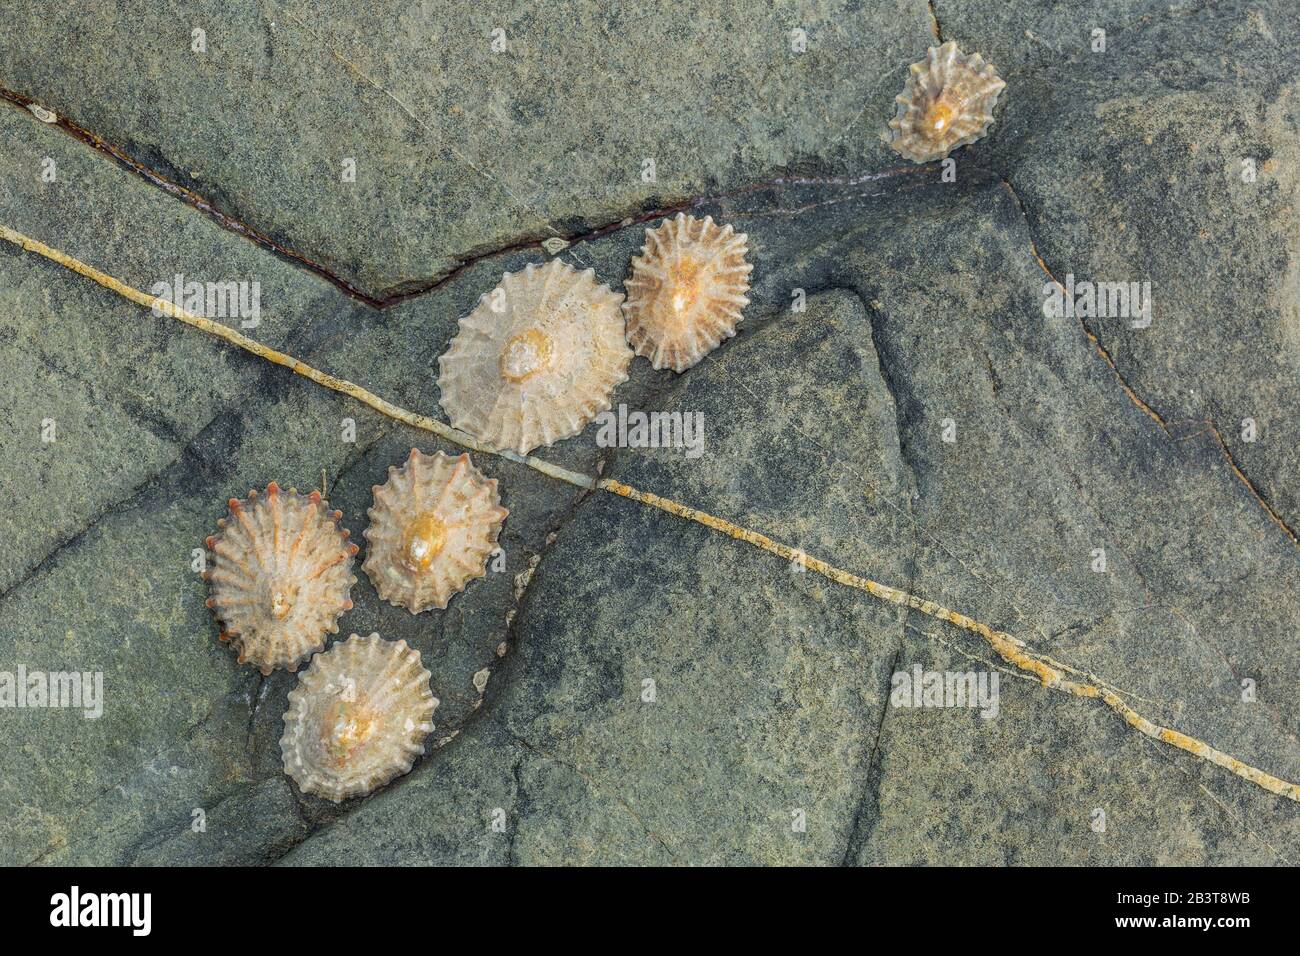 Limpets on a rock, Welcombe Bay, Devon, England, UK Stock Photo